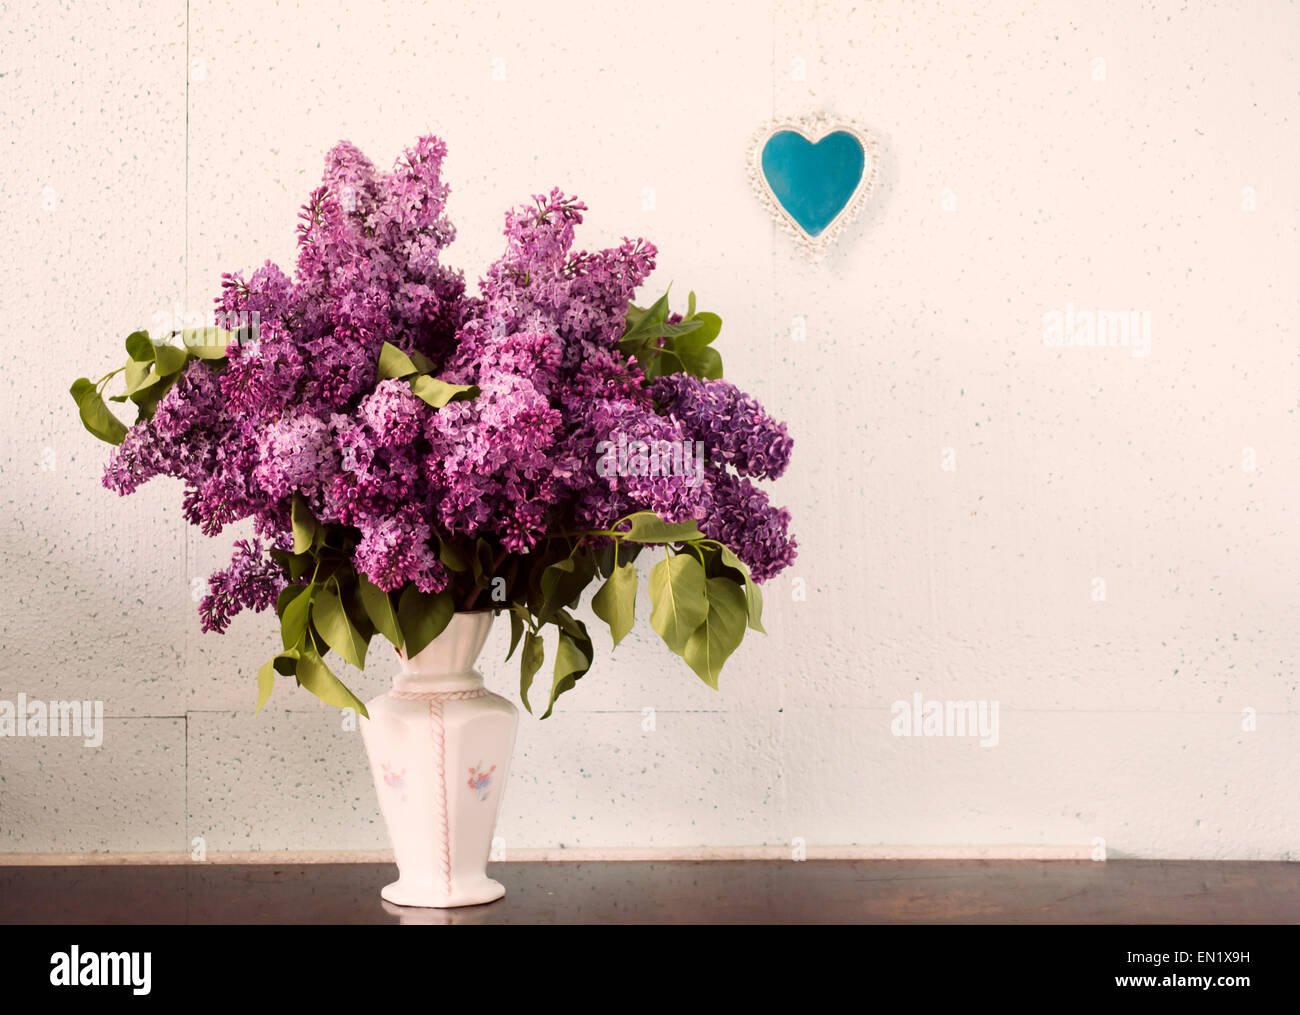 Lilac in a Vase and small heart-shaped mirror on the wall. Stock Photo